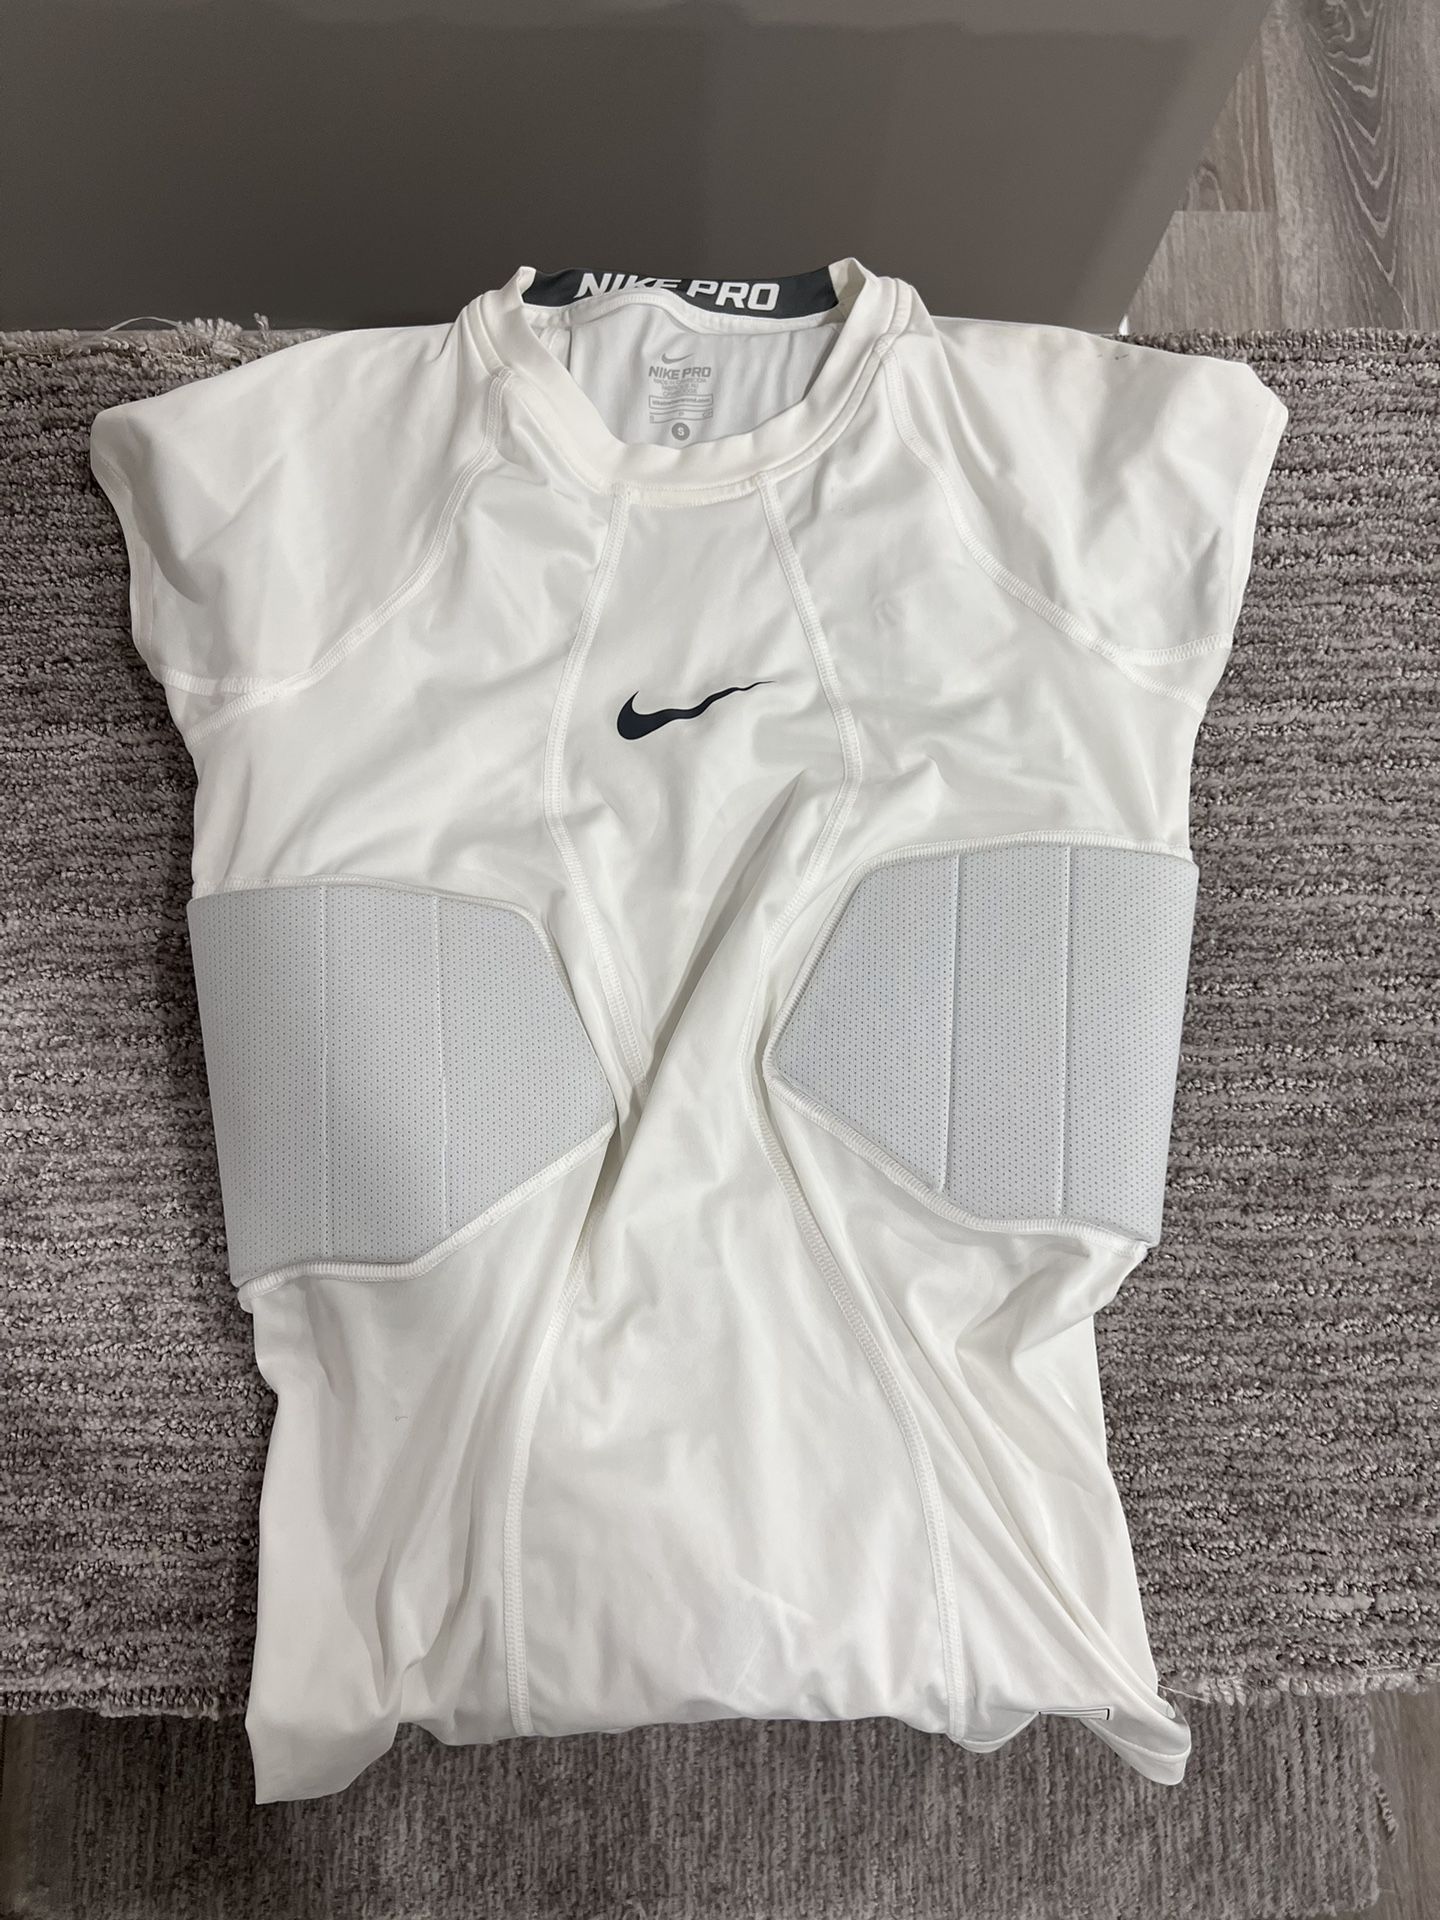 Nike Pro Hyperstrong Padded Football Sports Shirt Size Small for Sale in  Palos Heights, IL - OfferUp